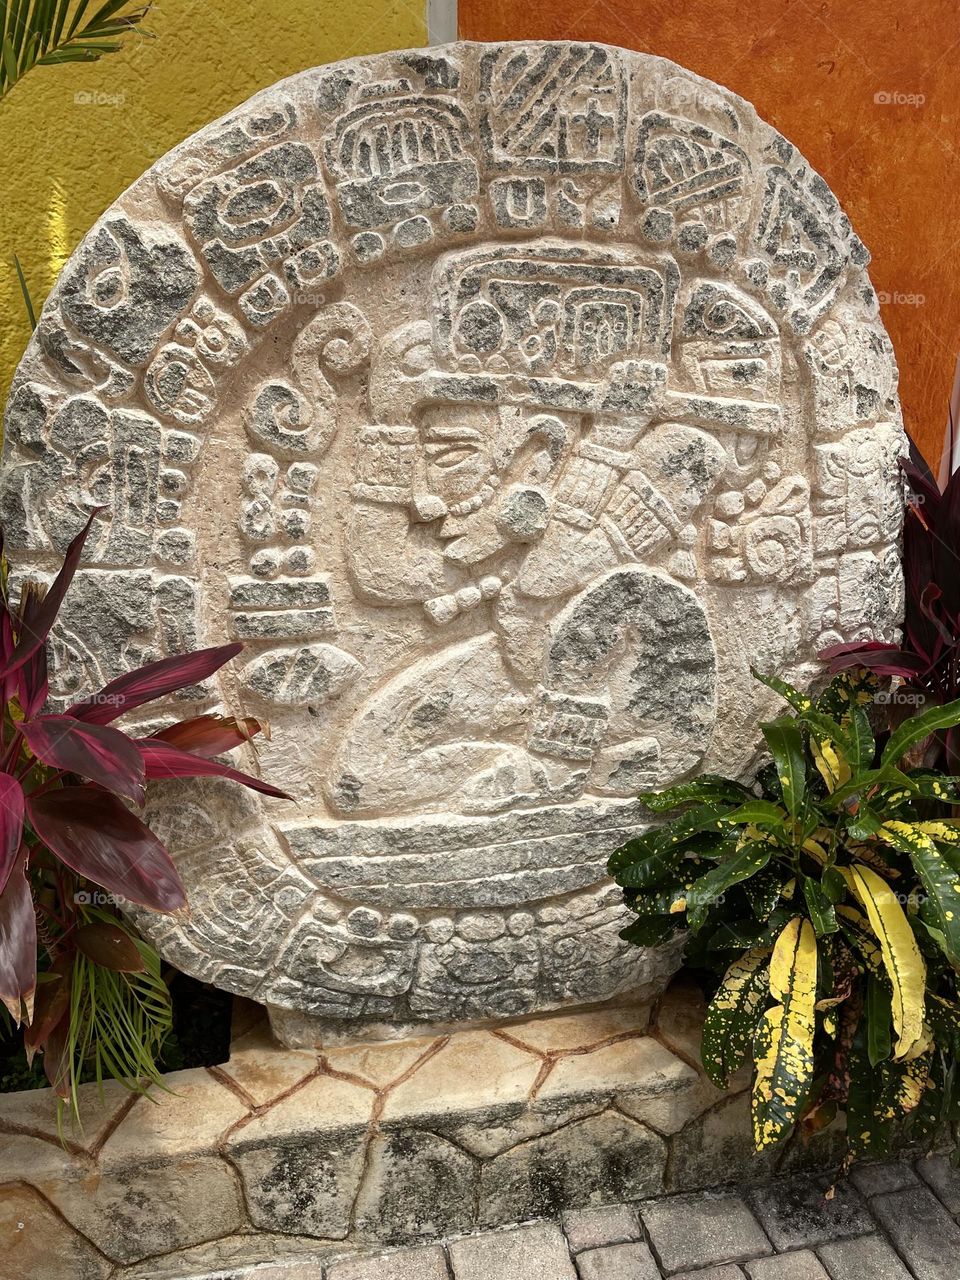 Stone carving in Cozumel